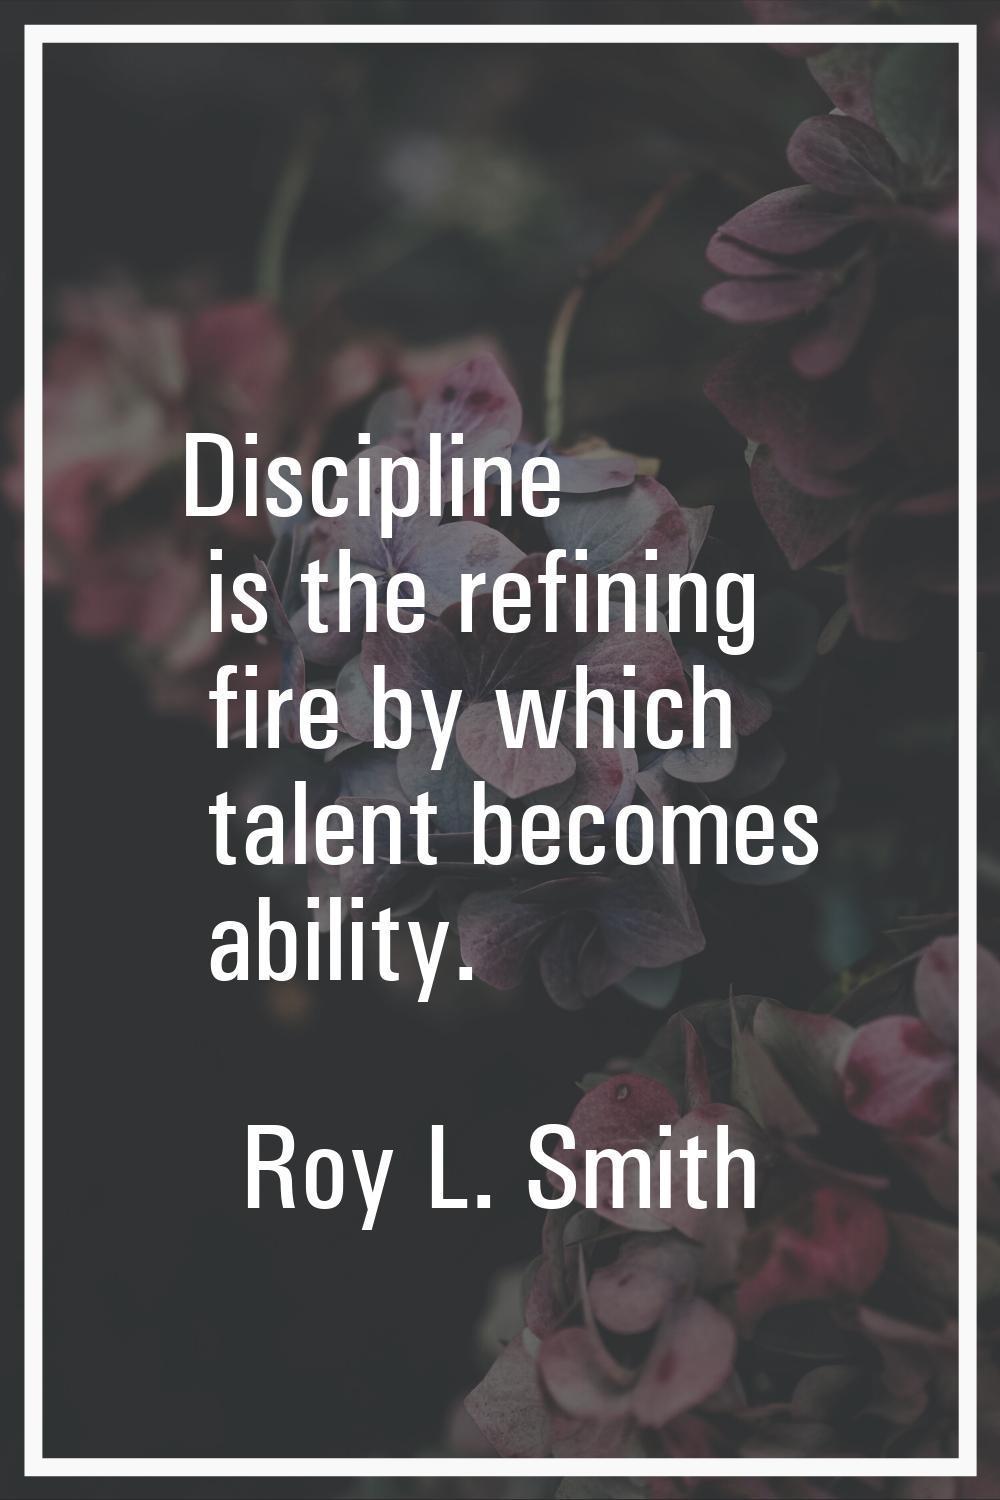 Discipline is the refining fire by which talent becomes ability.